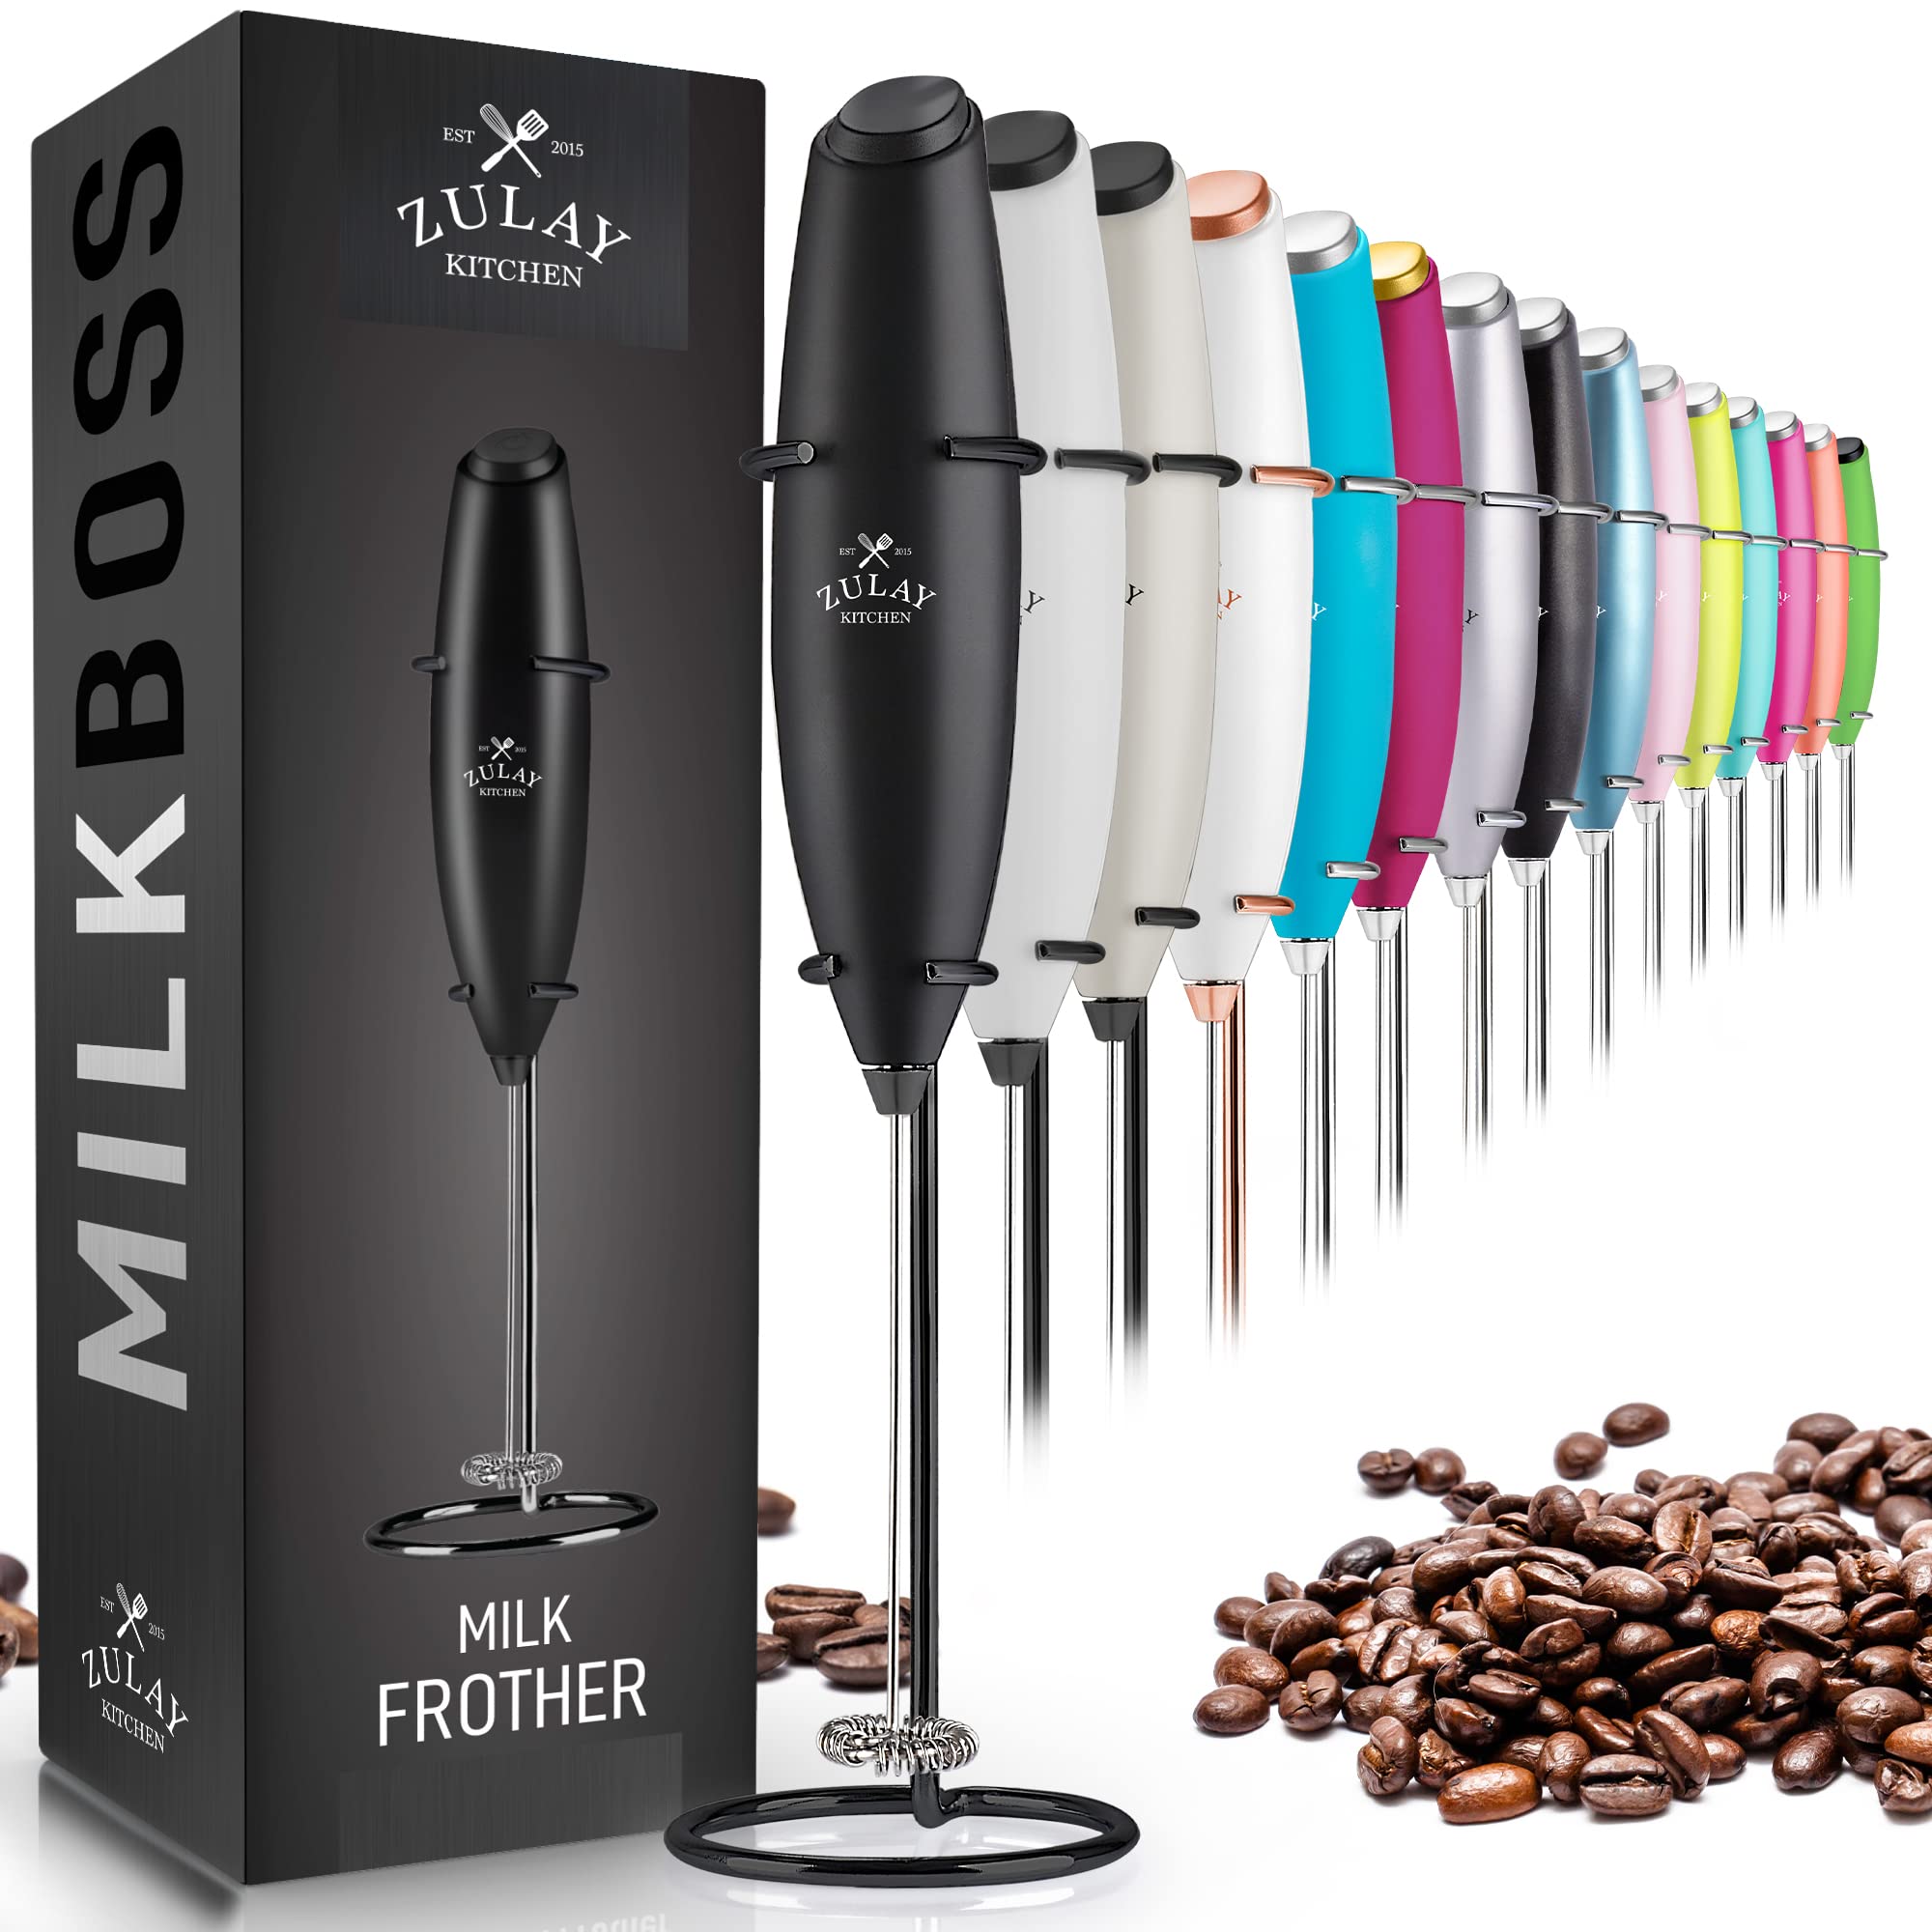 Zulay Kitchen MILK BOSS Milk Frother With Stand - Mimosas, 1 - Foods Co.